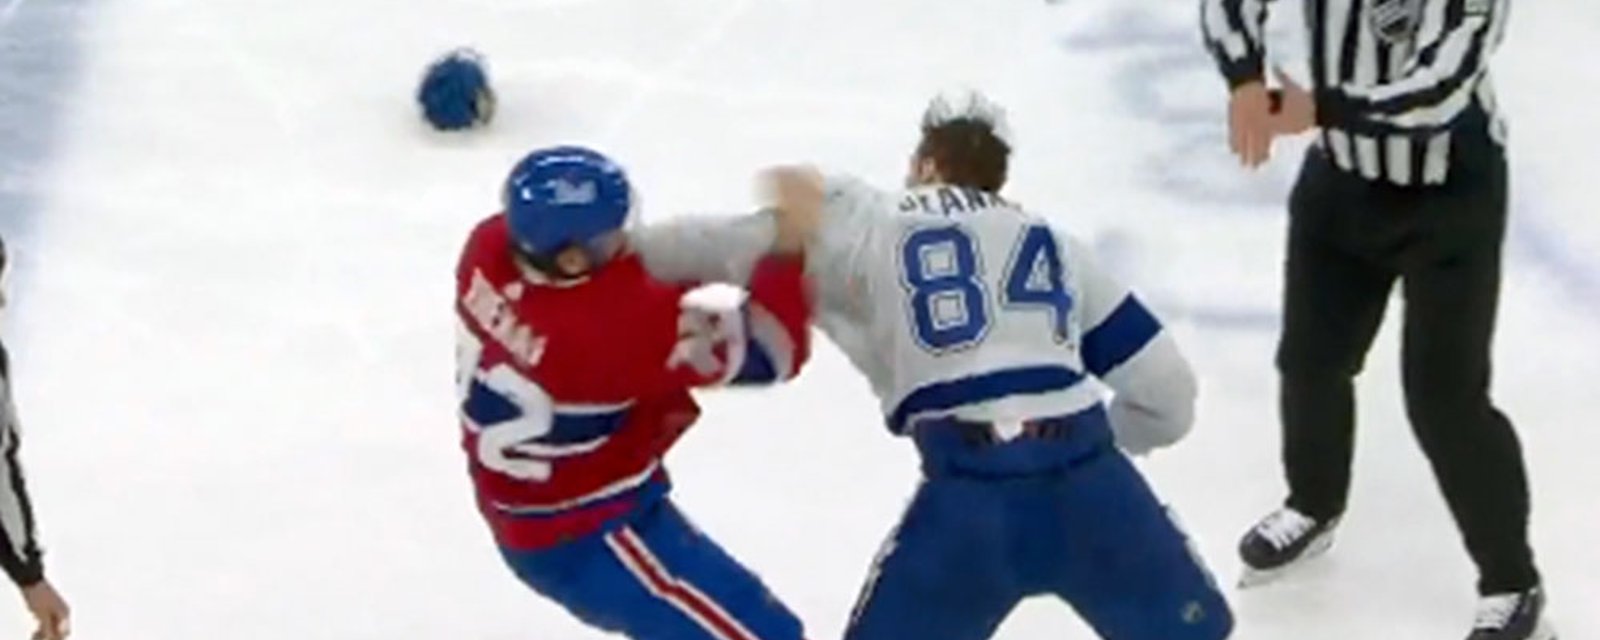 Xhekaj and Jeannot drop the gloves and go at it in Montreal